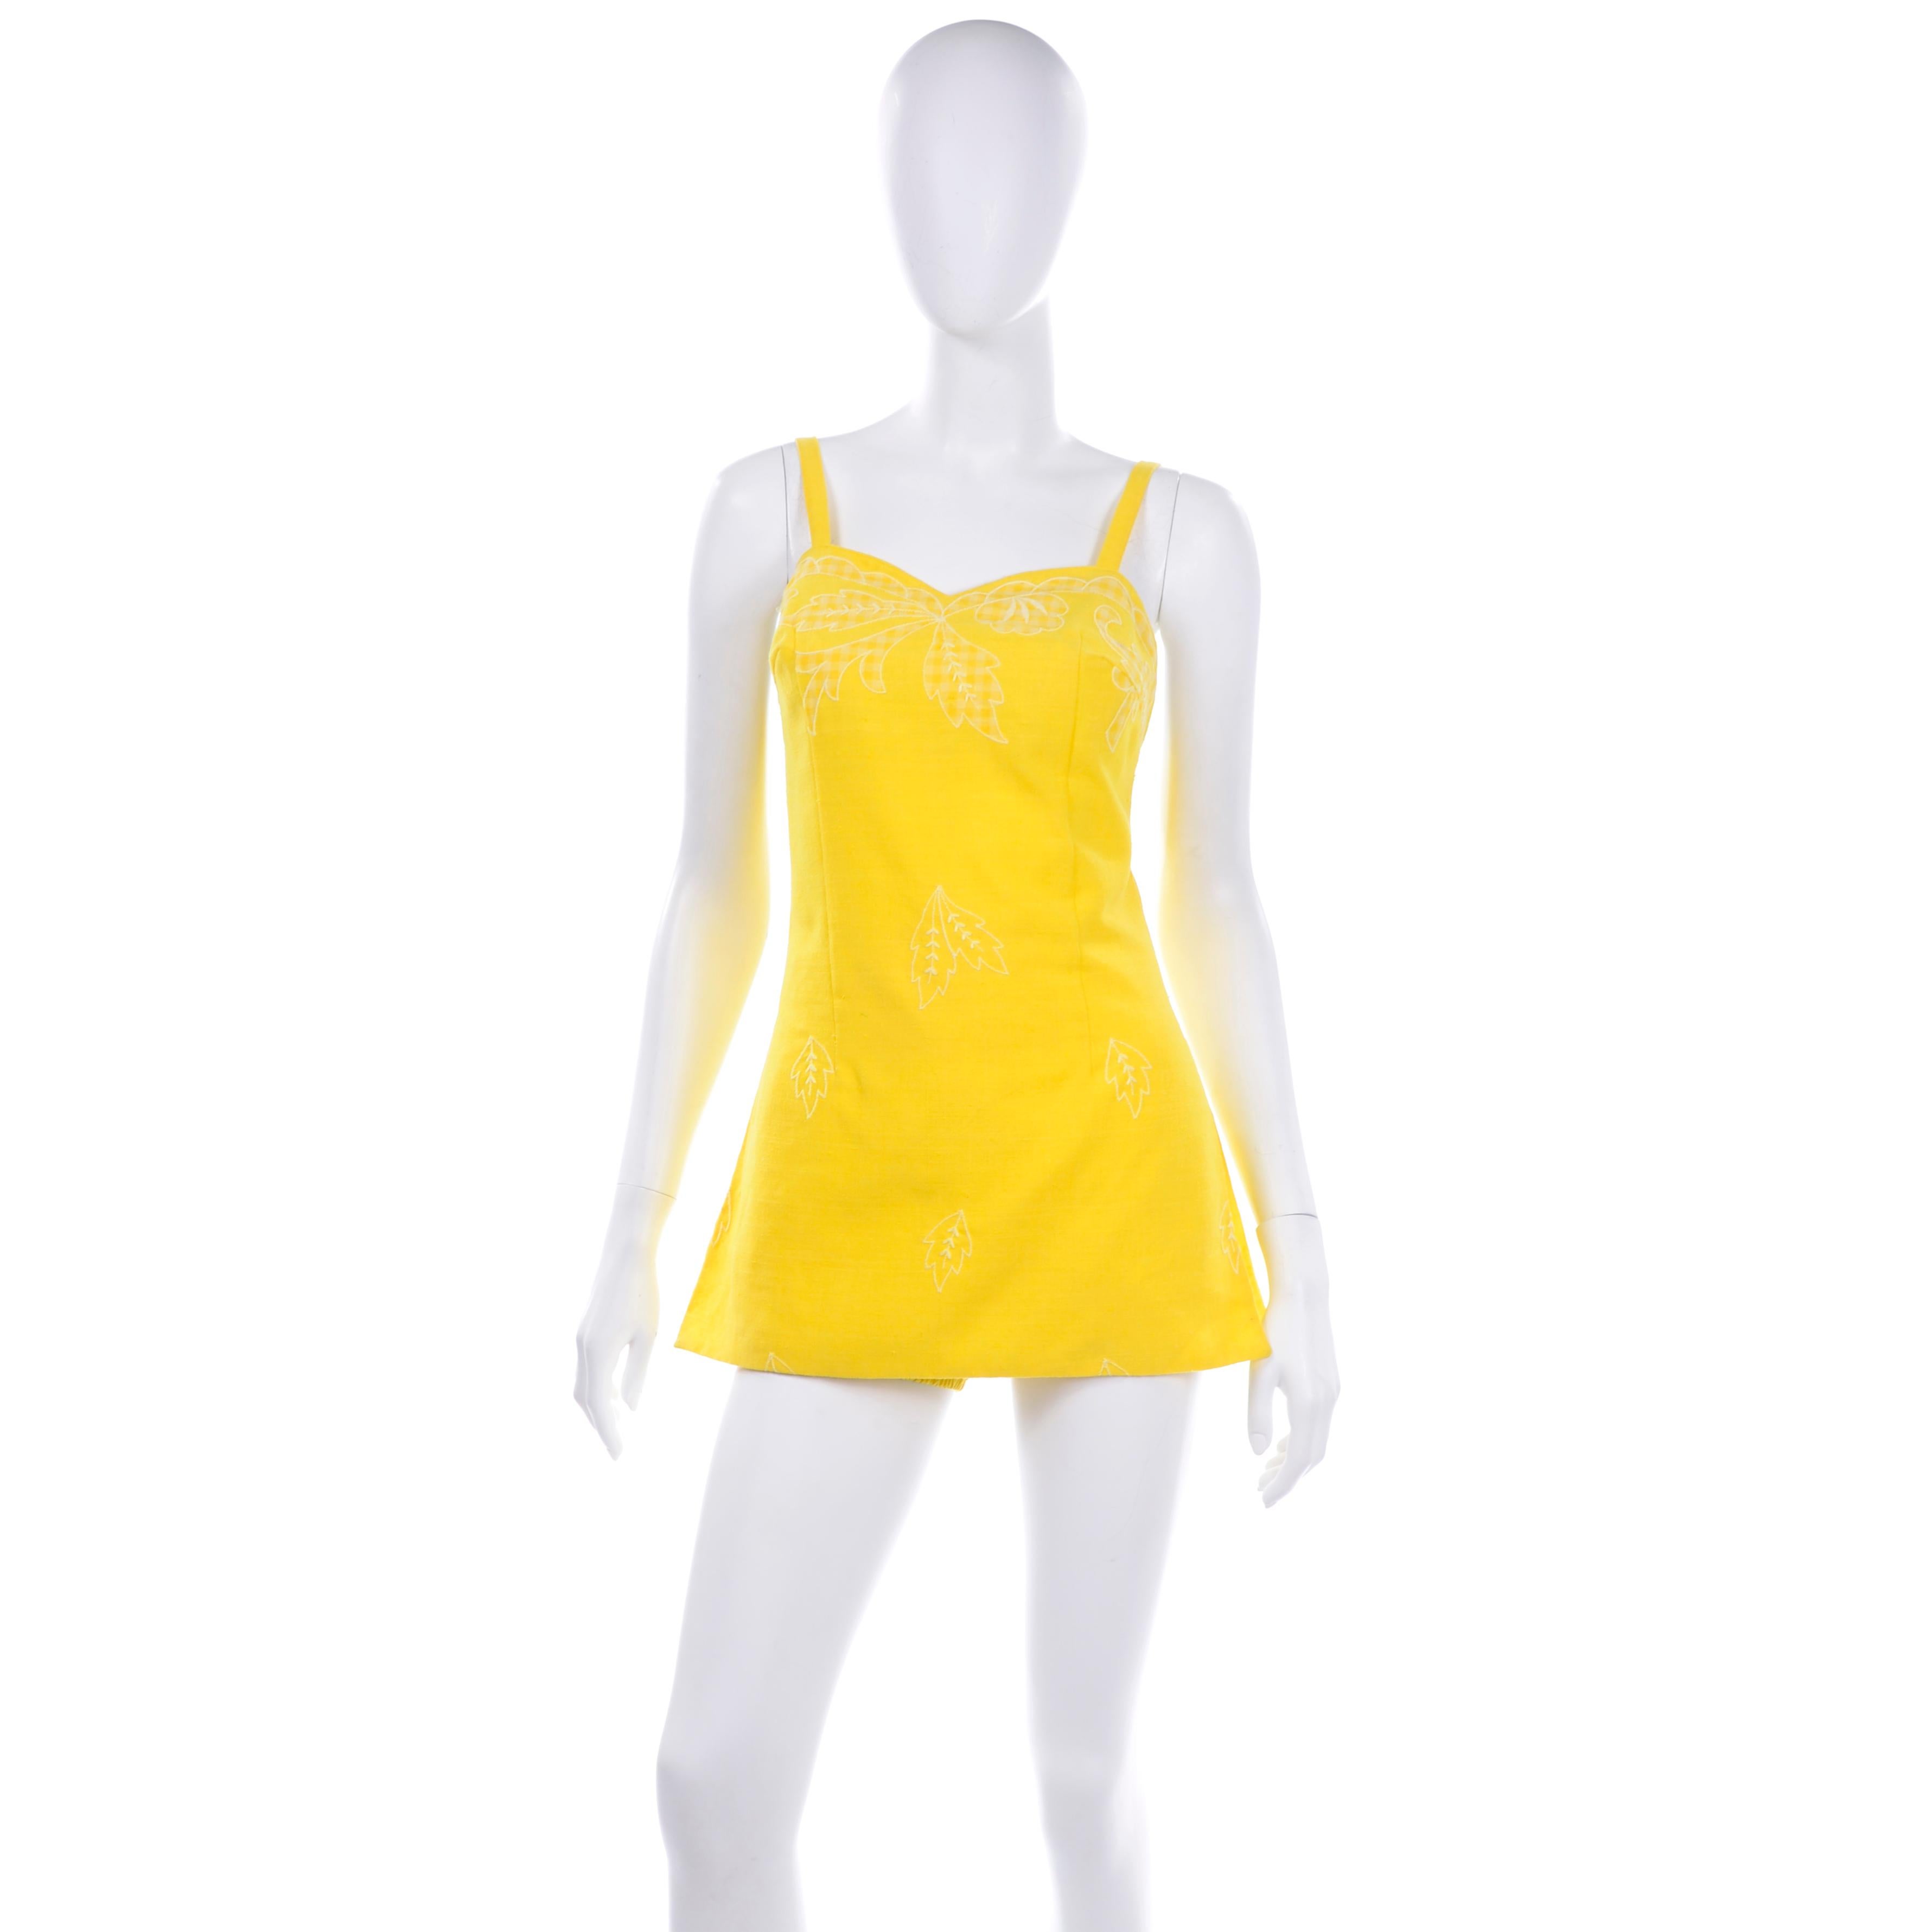 this is a pristine Tina Leser for GaBar New York vintage, never worn early 1960s swimsuit or romper. We love the  fabulous shade of sunshine yellow and the checked gingham applique at bustline and pretty white leaf embroidery. This is a super